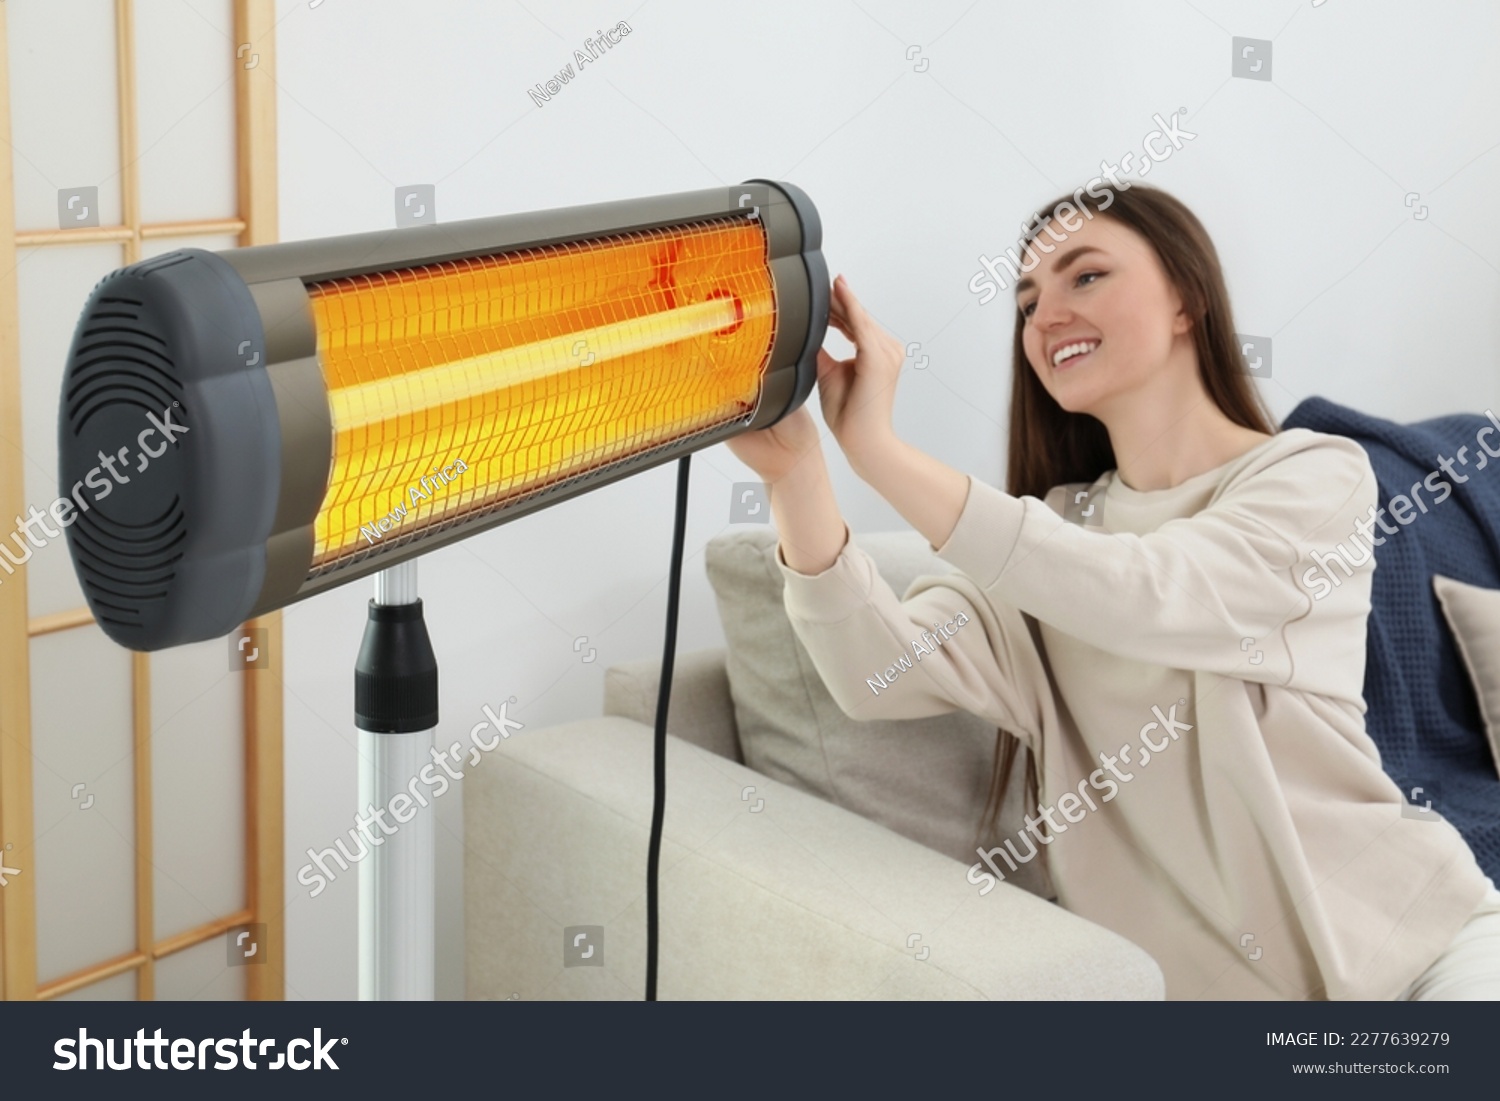 Woman adjusting temperature on electric infrared heater indoors #2277639279